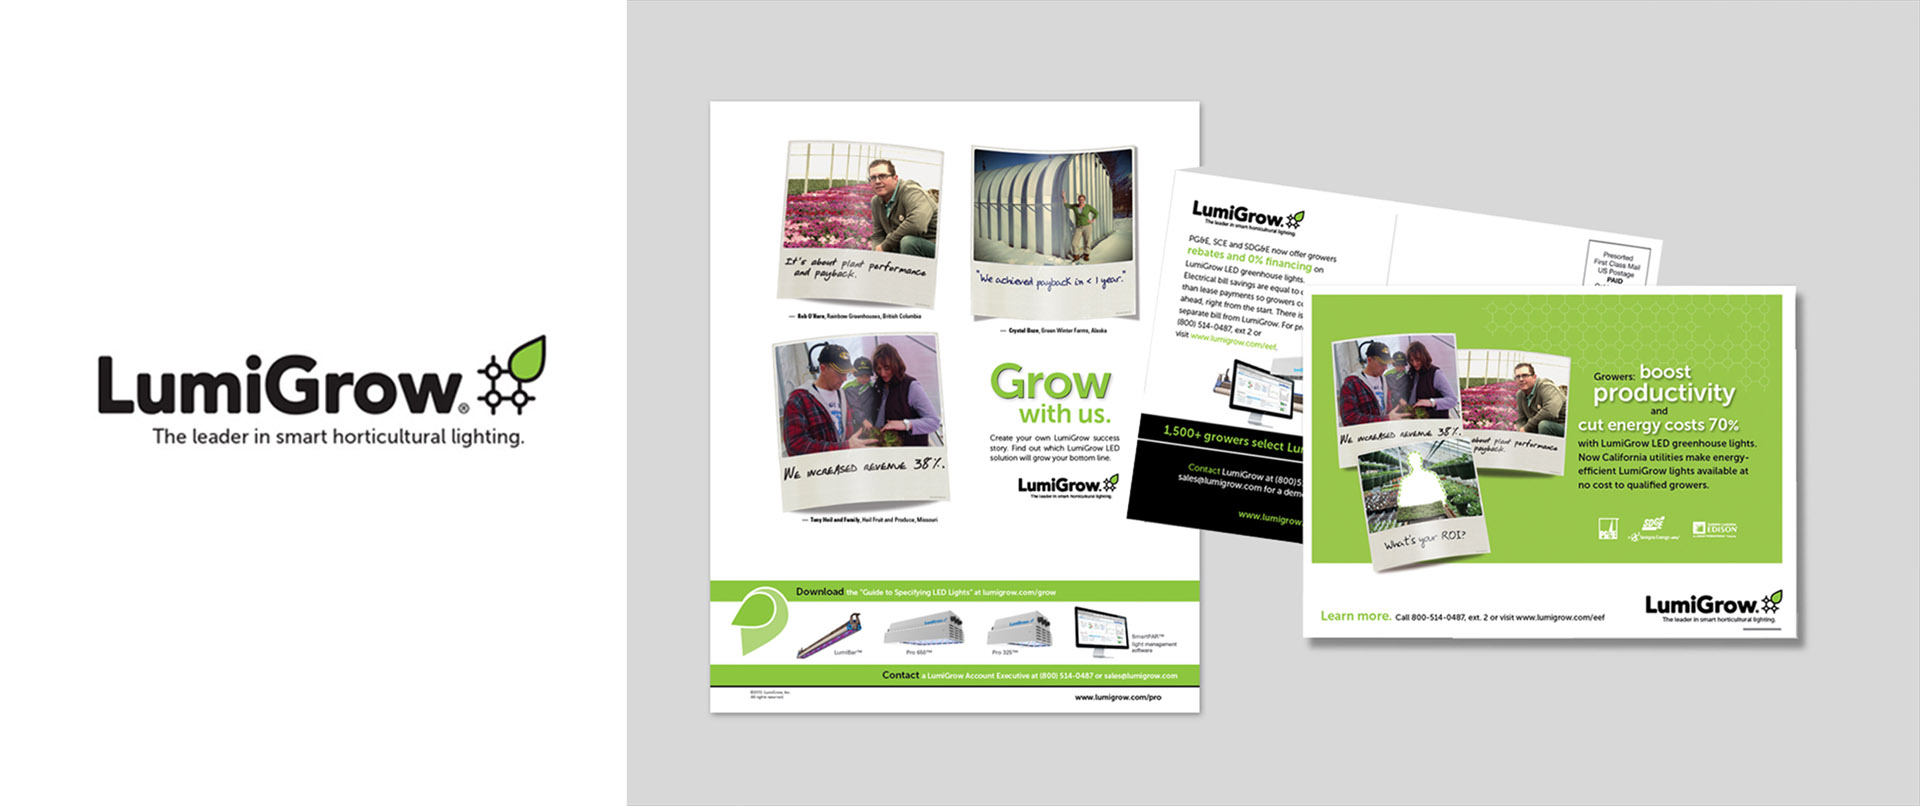 image of brand identity and identity, ad, and marketing collateral for Lumigrow